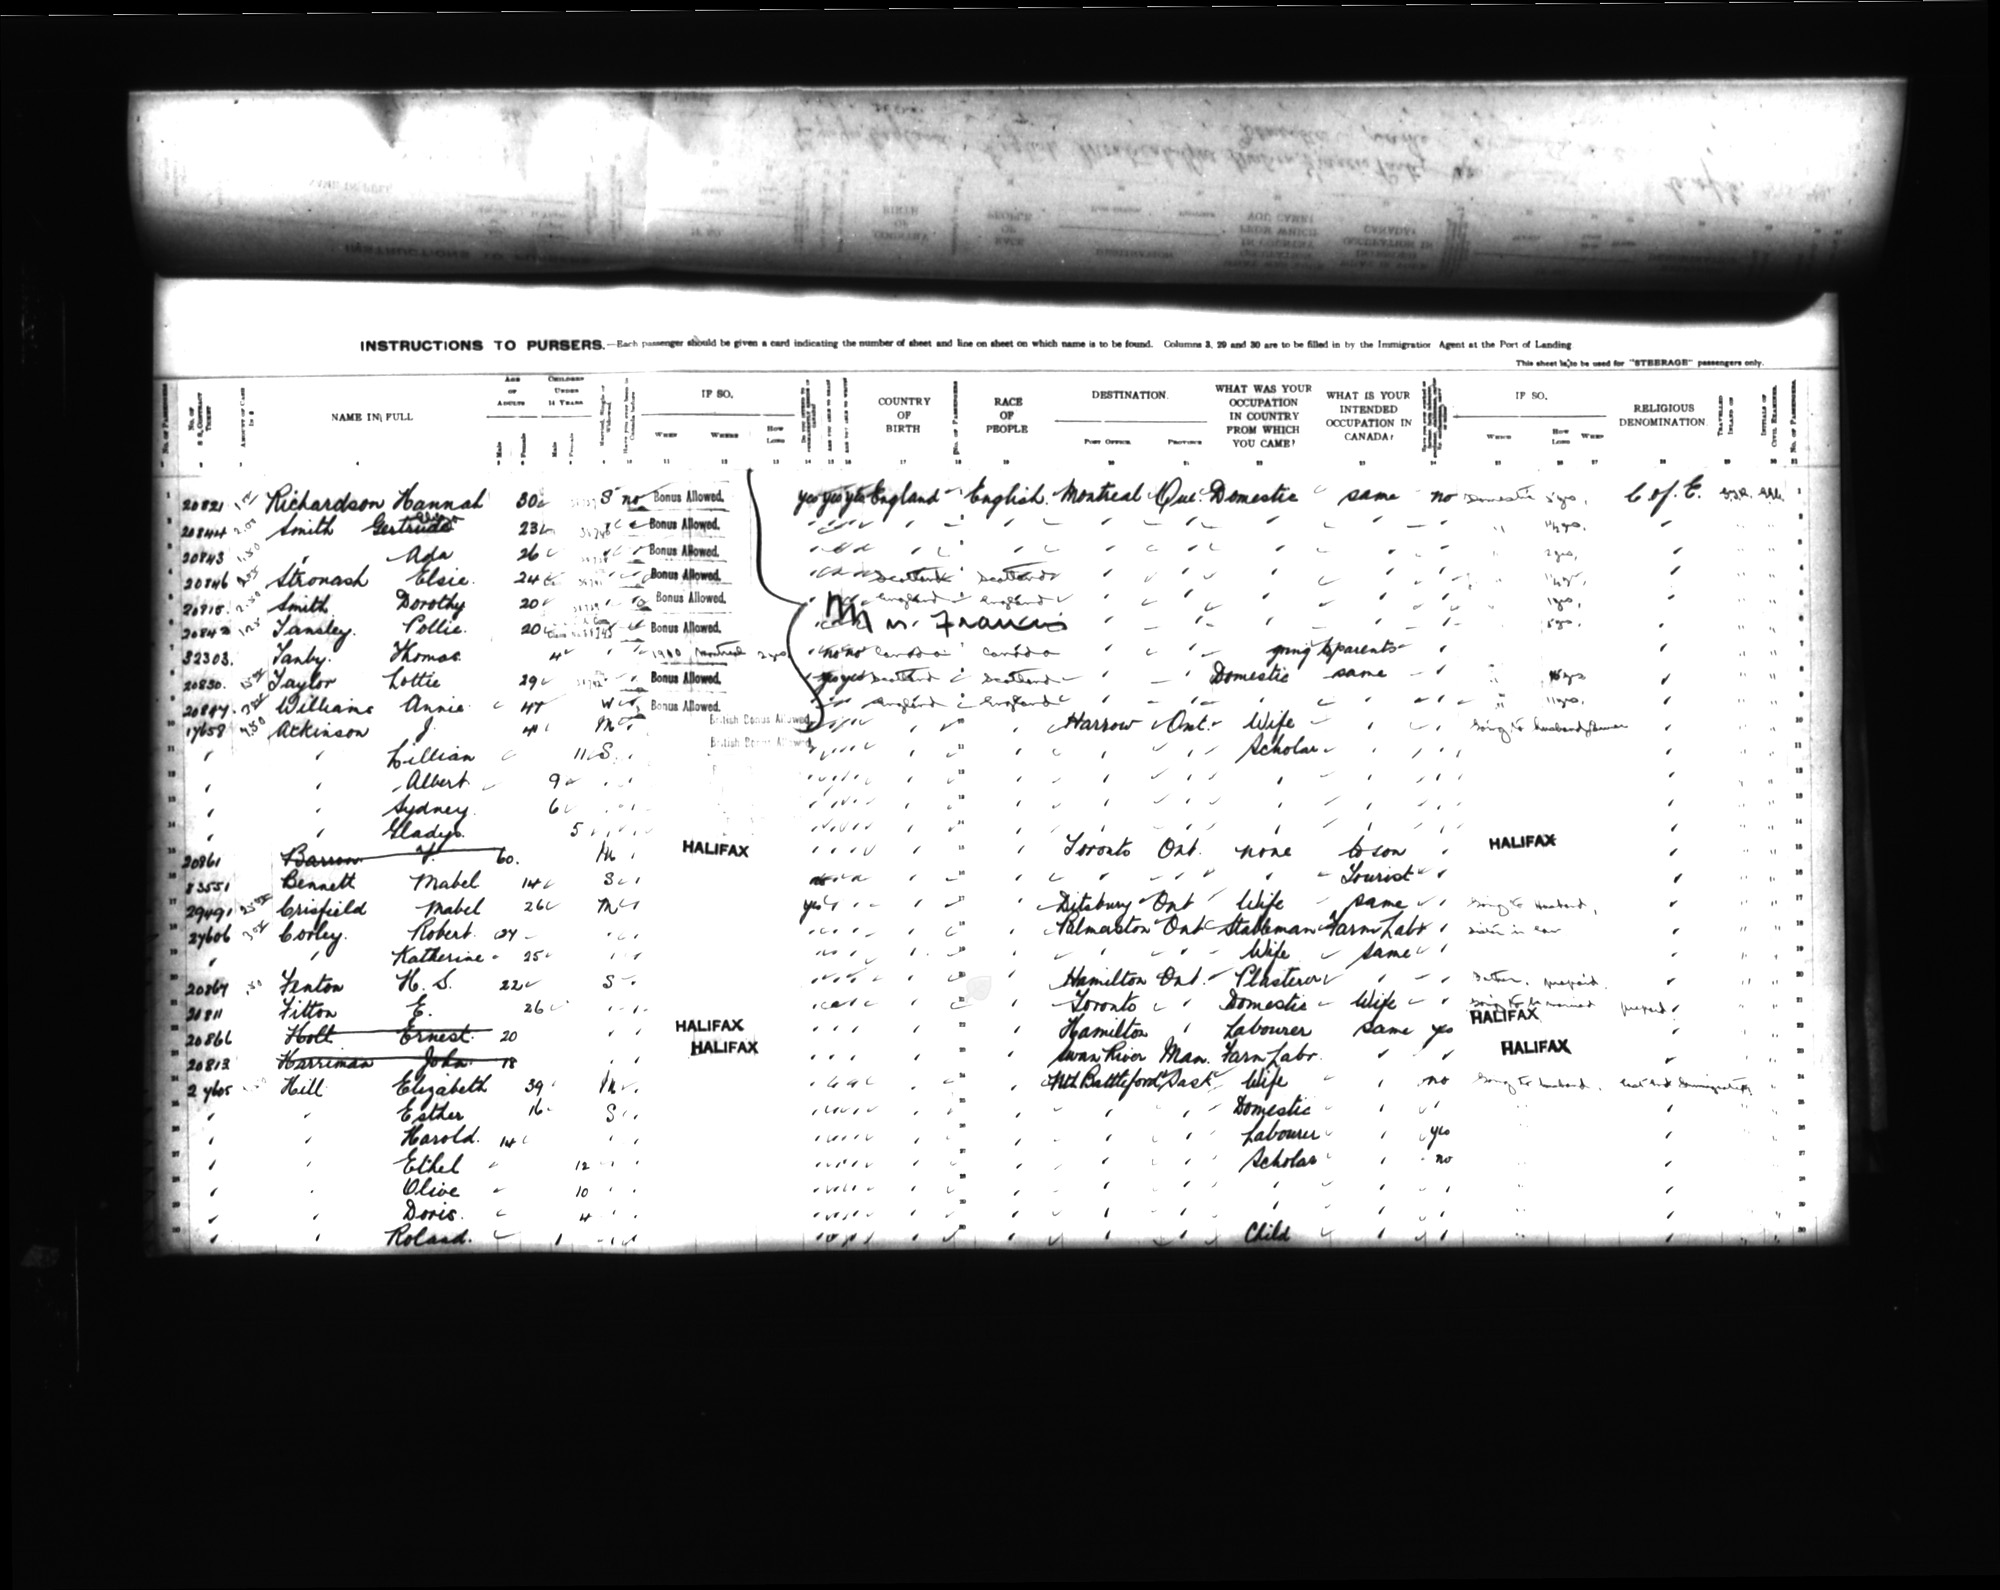 Digitized page of Passenger Lists for Image No.: CANIMM1913PLIST_0000406960-00591